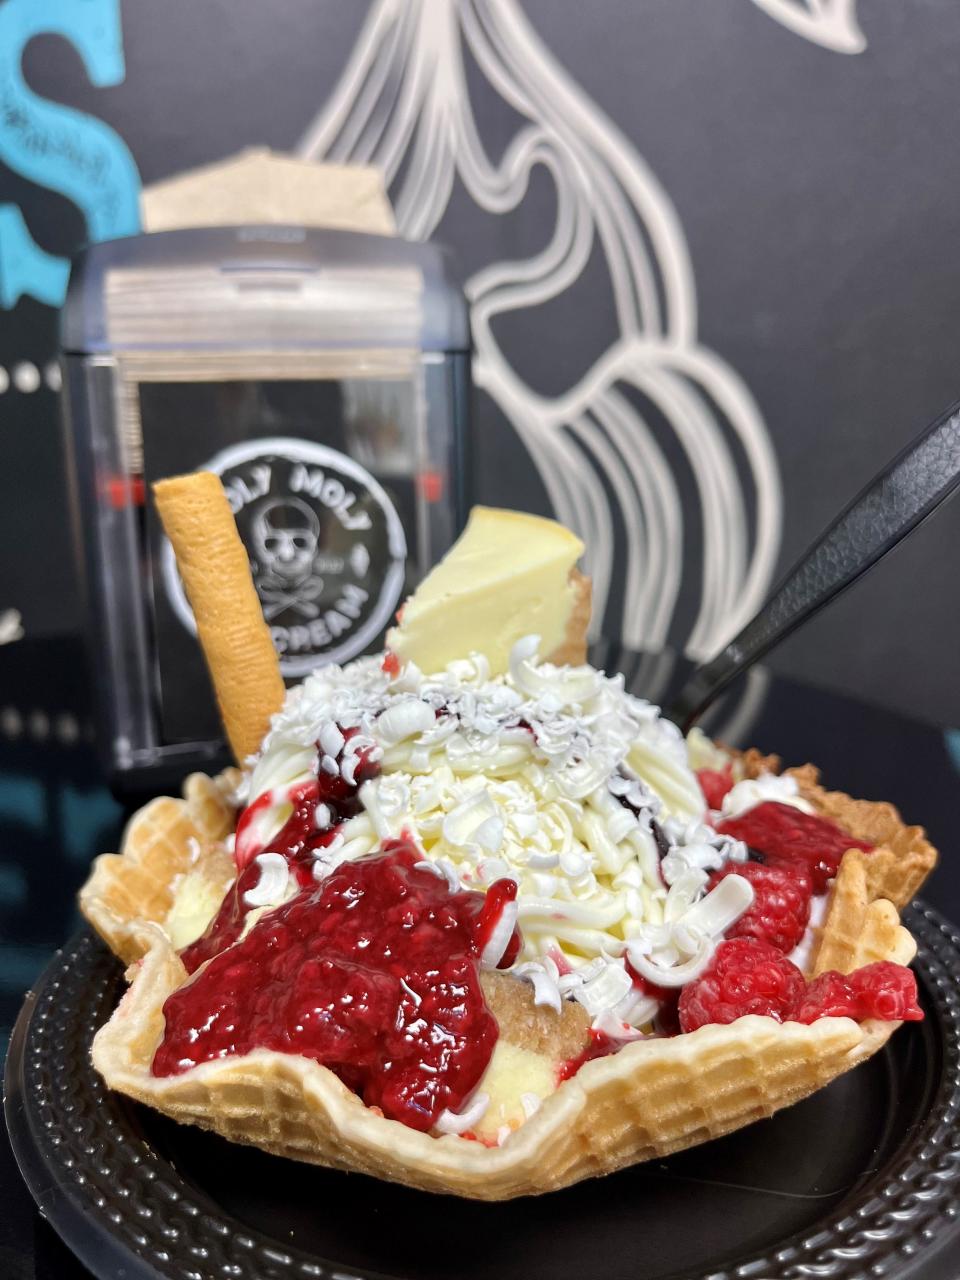 Holy Moly's cheesecake creation has two scoops of white chocolate gelato, whipped cream, raspberry sauce, fresh raspberries, cheesecake pieces, white chocolate flakes and a wafer.